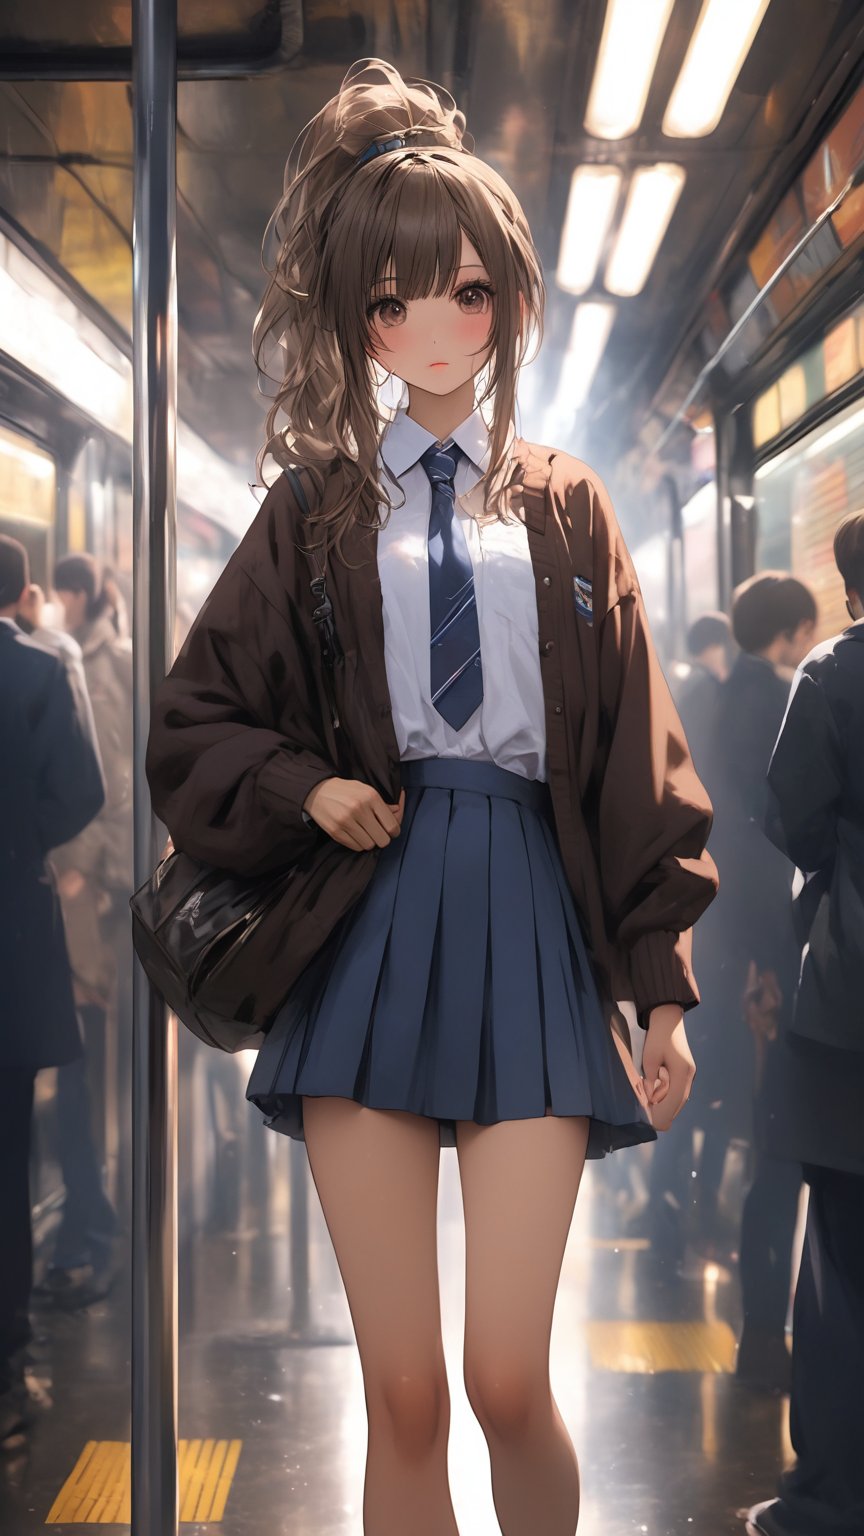 masterpiece, (((Realistic and delicate high-resolution , Realistic and delicate high-quality ,(Well-proportioned and perfect body proportion structure),(((image structure of real human texture))), (((crowded_subway))), (((indoor))), (((fluorescent_light))), full_body, (Japanese high school girl), (Cold_face), (harsh_eyes), (heavy_makeup:1.1), (smokey_makeup:1.1), (narrow_waist), (gyaru), (black_long_hair), (loose-fitting_clothes:1.4), (black_cardigan), (light_blue_shirt), (((indigo_school_uniform_skirt))), (neck_tie), (skinny_body), (bangs), (dark_brown_eyes), (hime_cut, long_ponytail), ((subway chairs, subway windows, subway handles, subway pole, subway doors,))